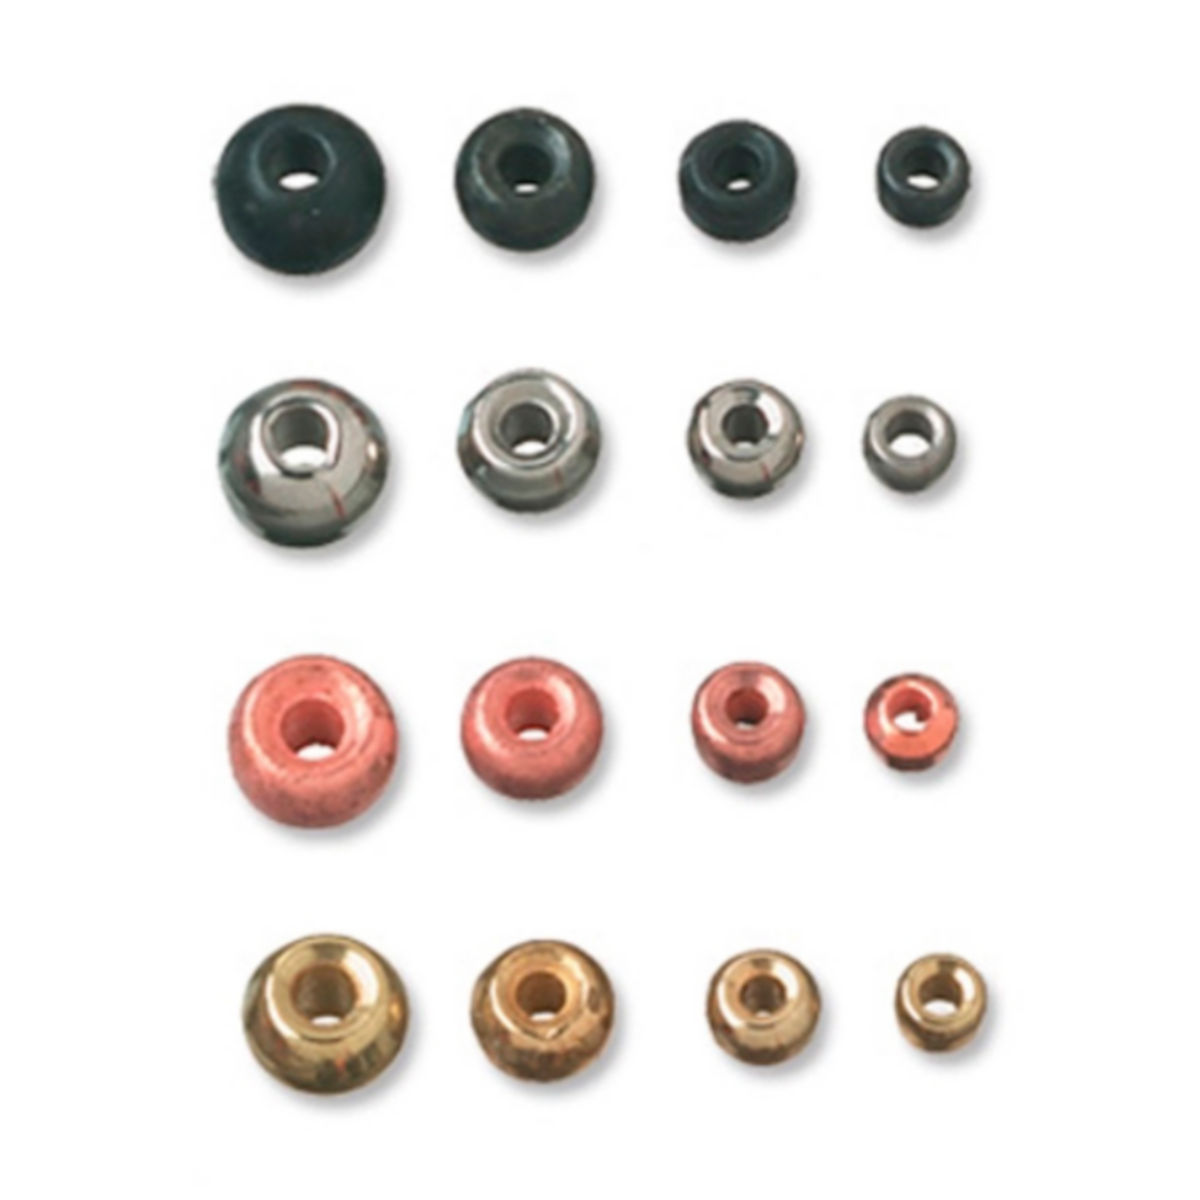 20 COPPER TUNGSTEN ROUND BEADS FOR FLY TYING YOU PICK FROM 5 SIZES 